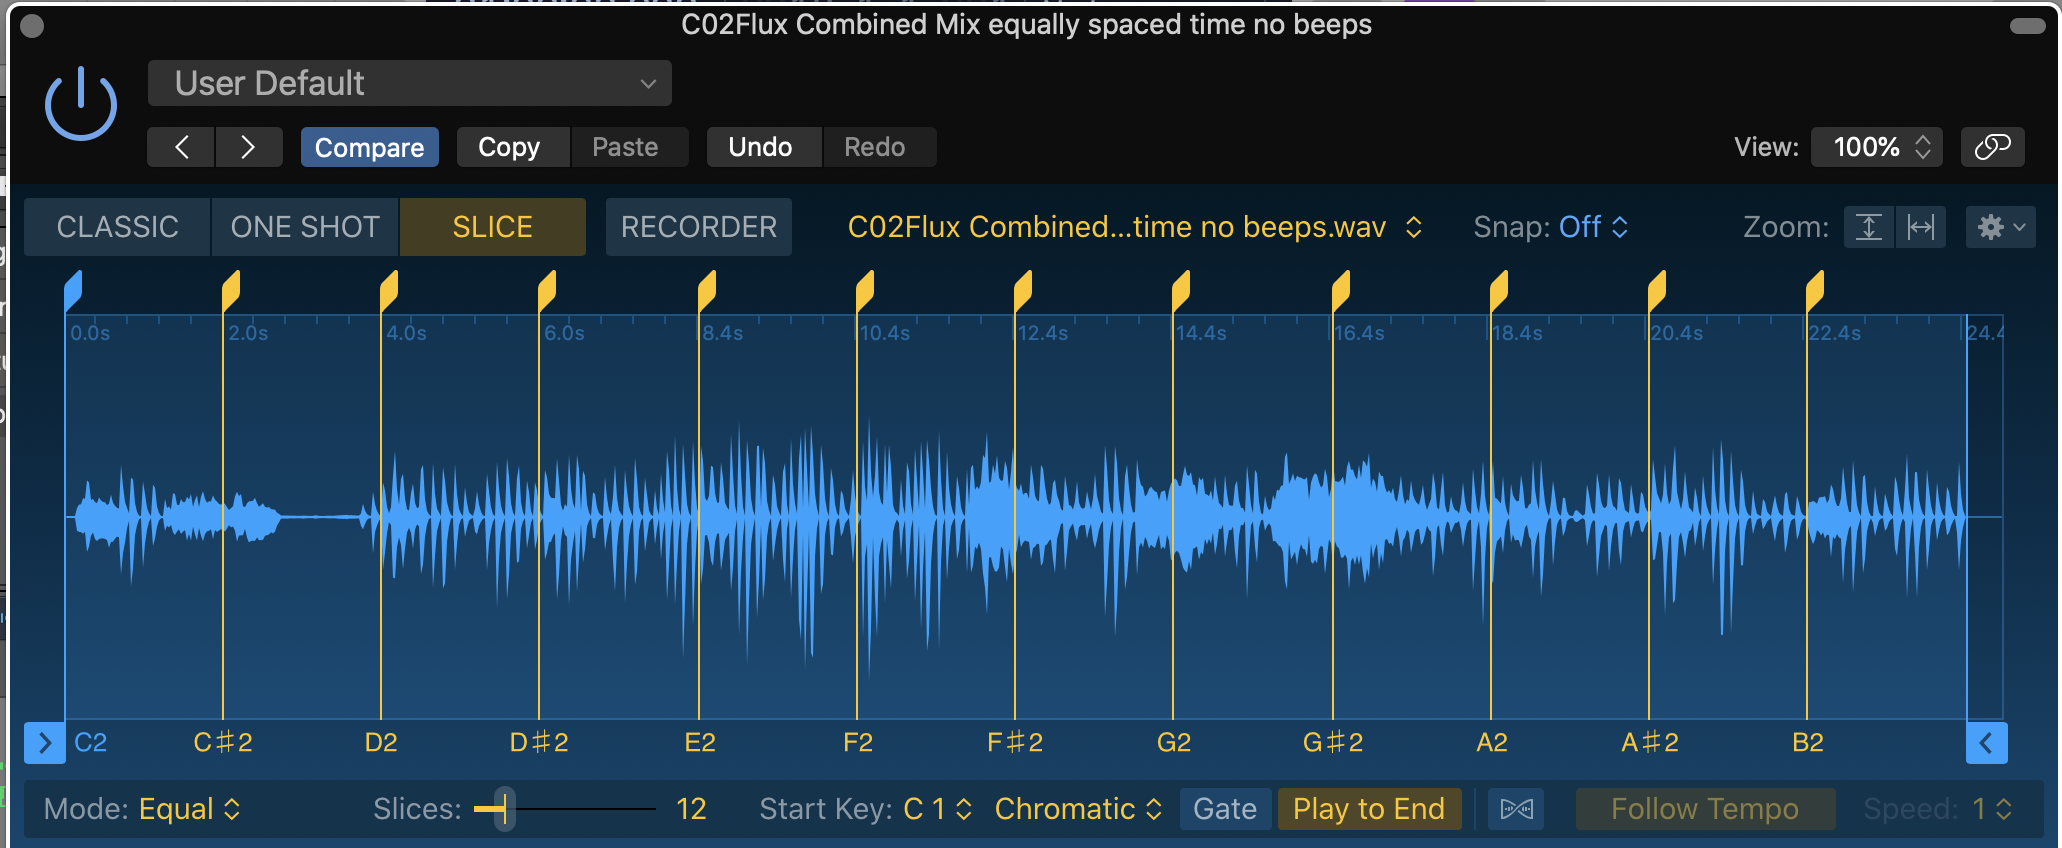 Image of Logic Pro X's Quick Sampler showing equal-spaced playback markers